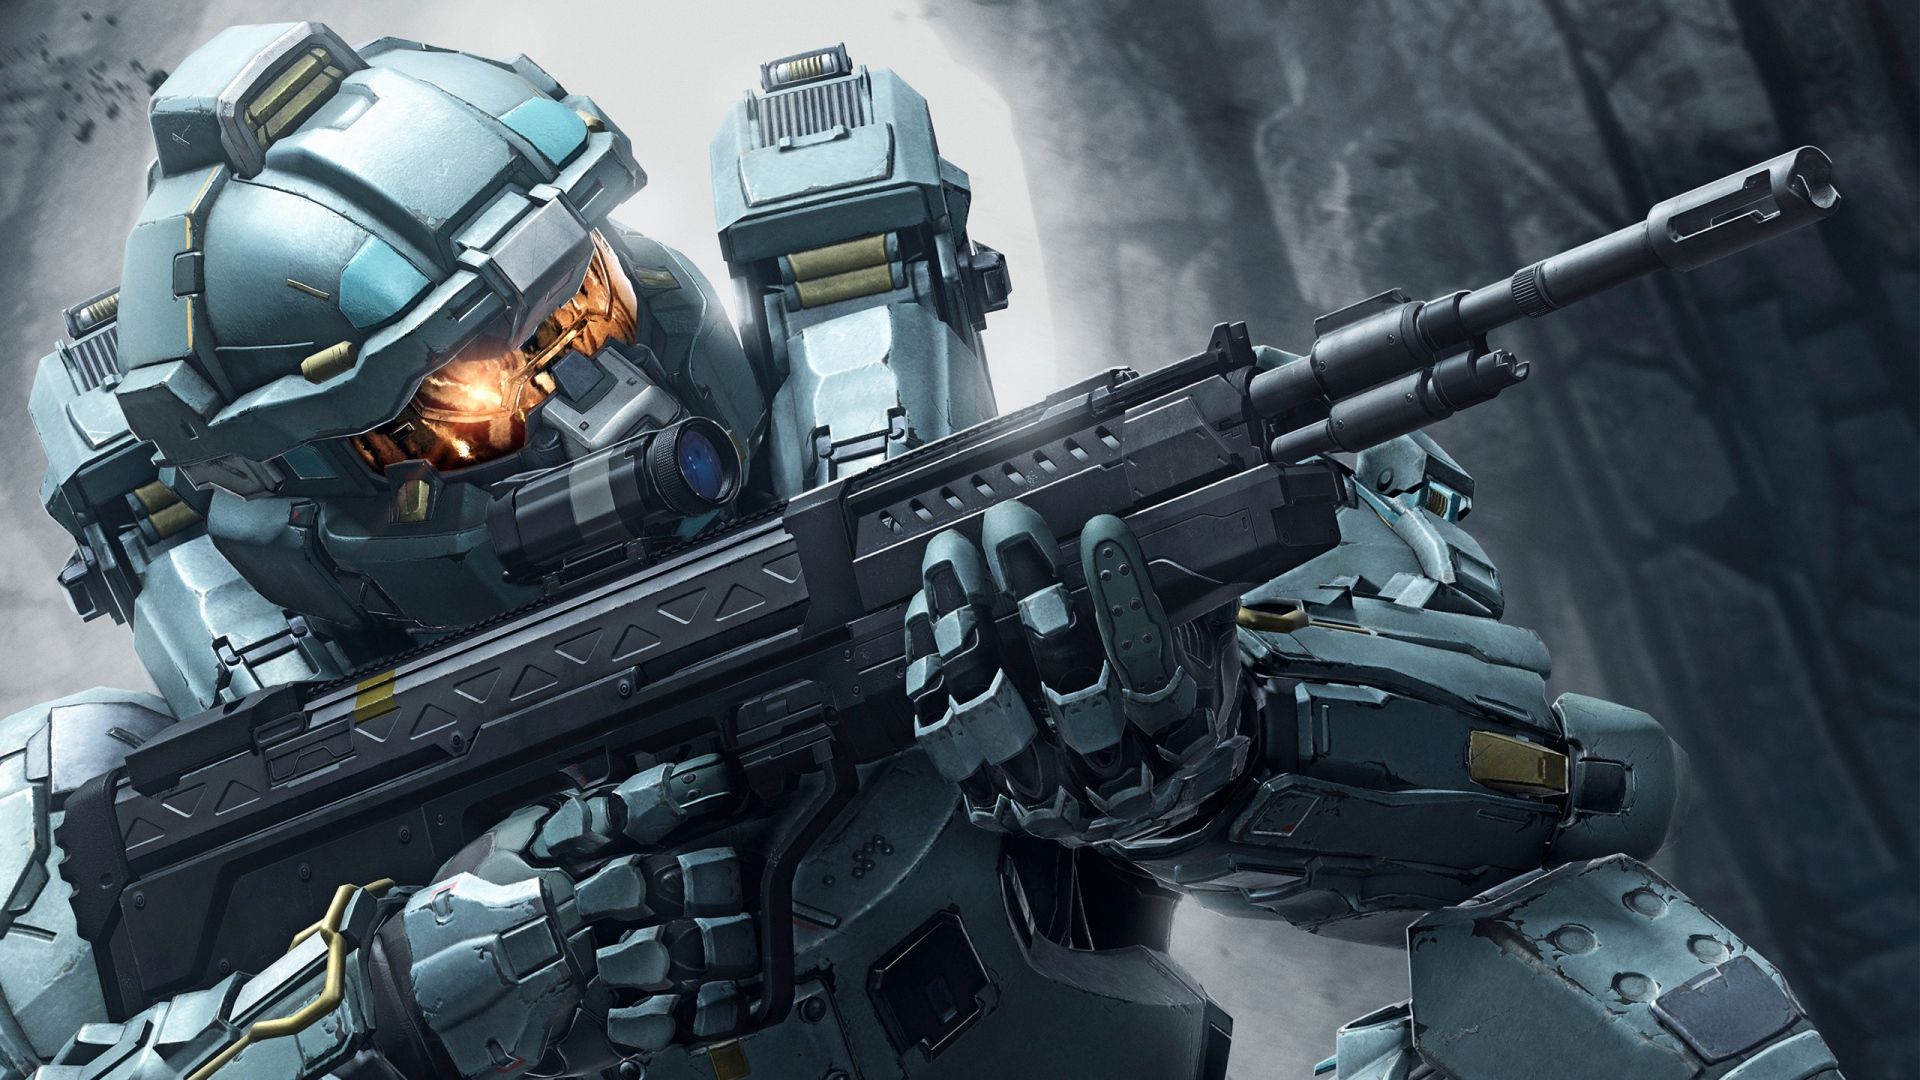 Download Wallpaper 1920x1080 Halo 5, Soldiers, Weapons, Automaton ...